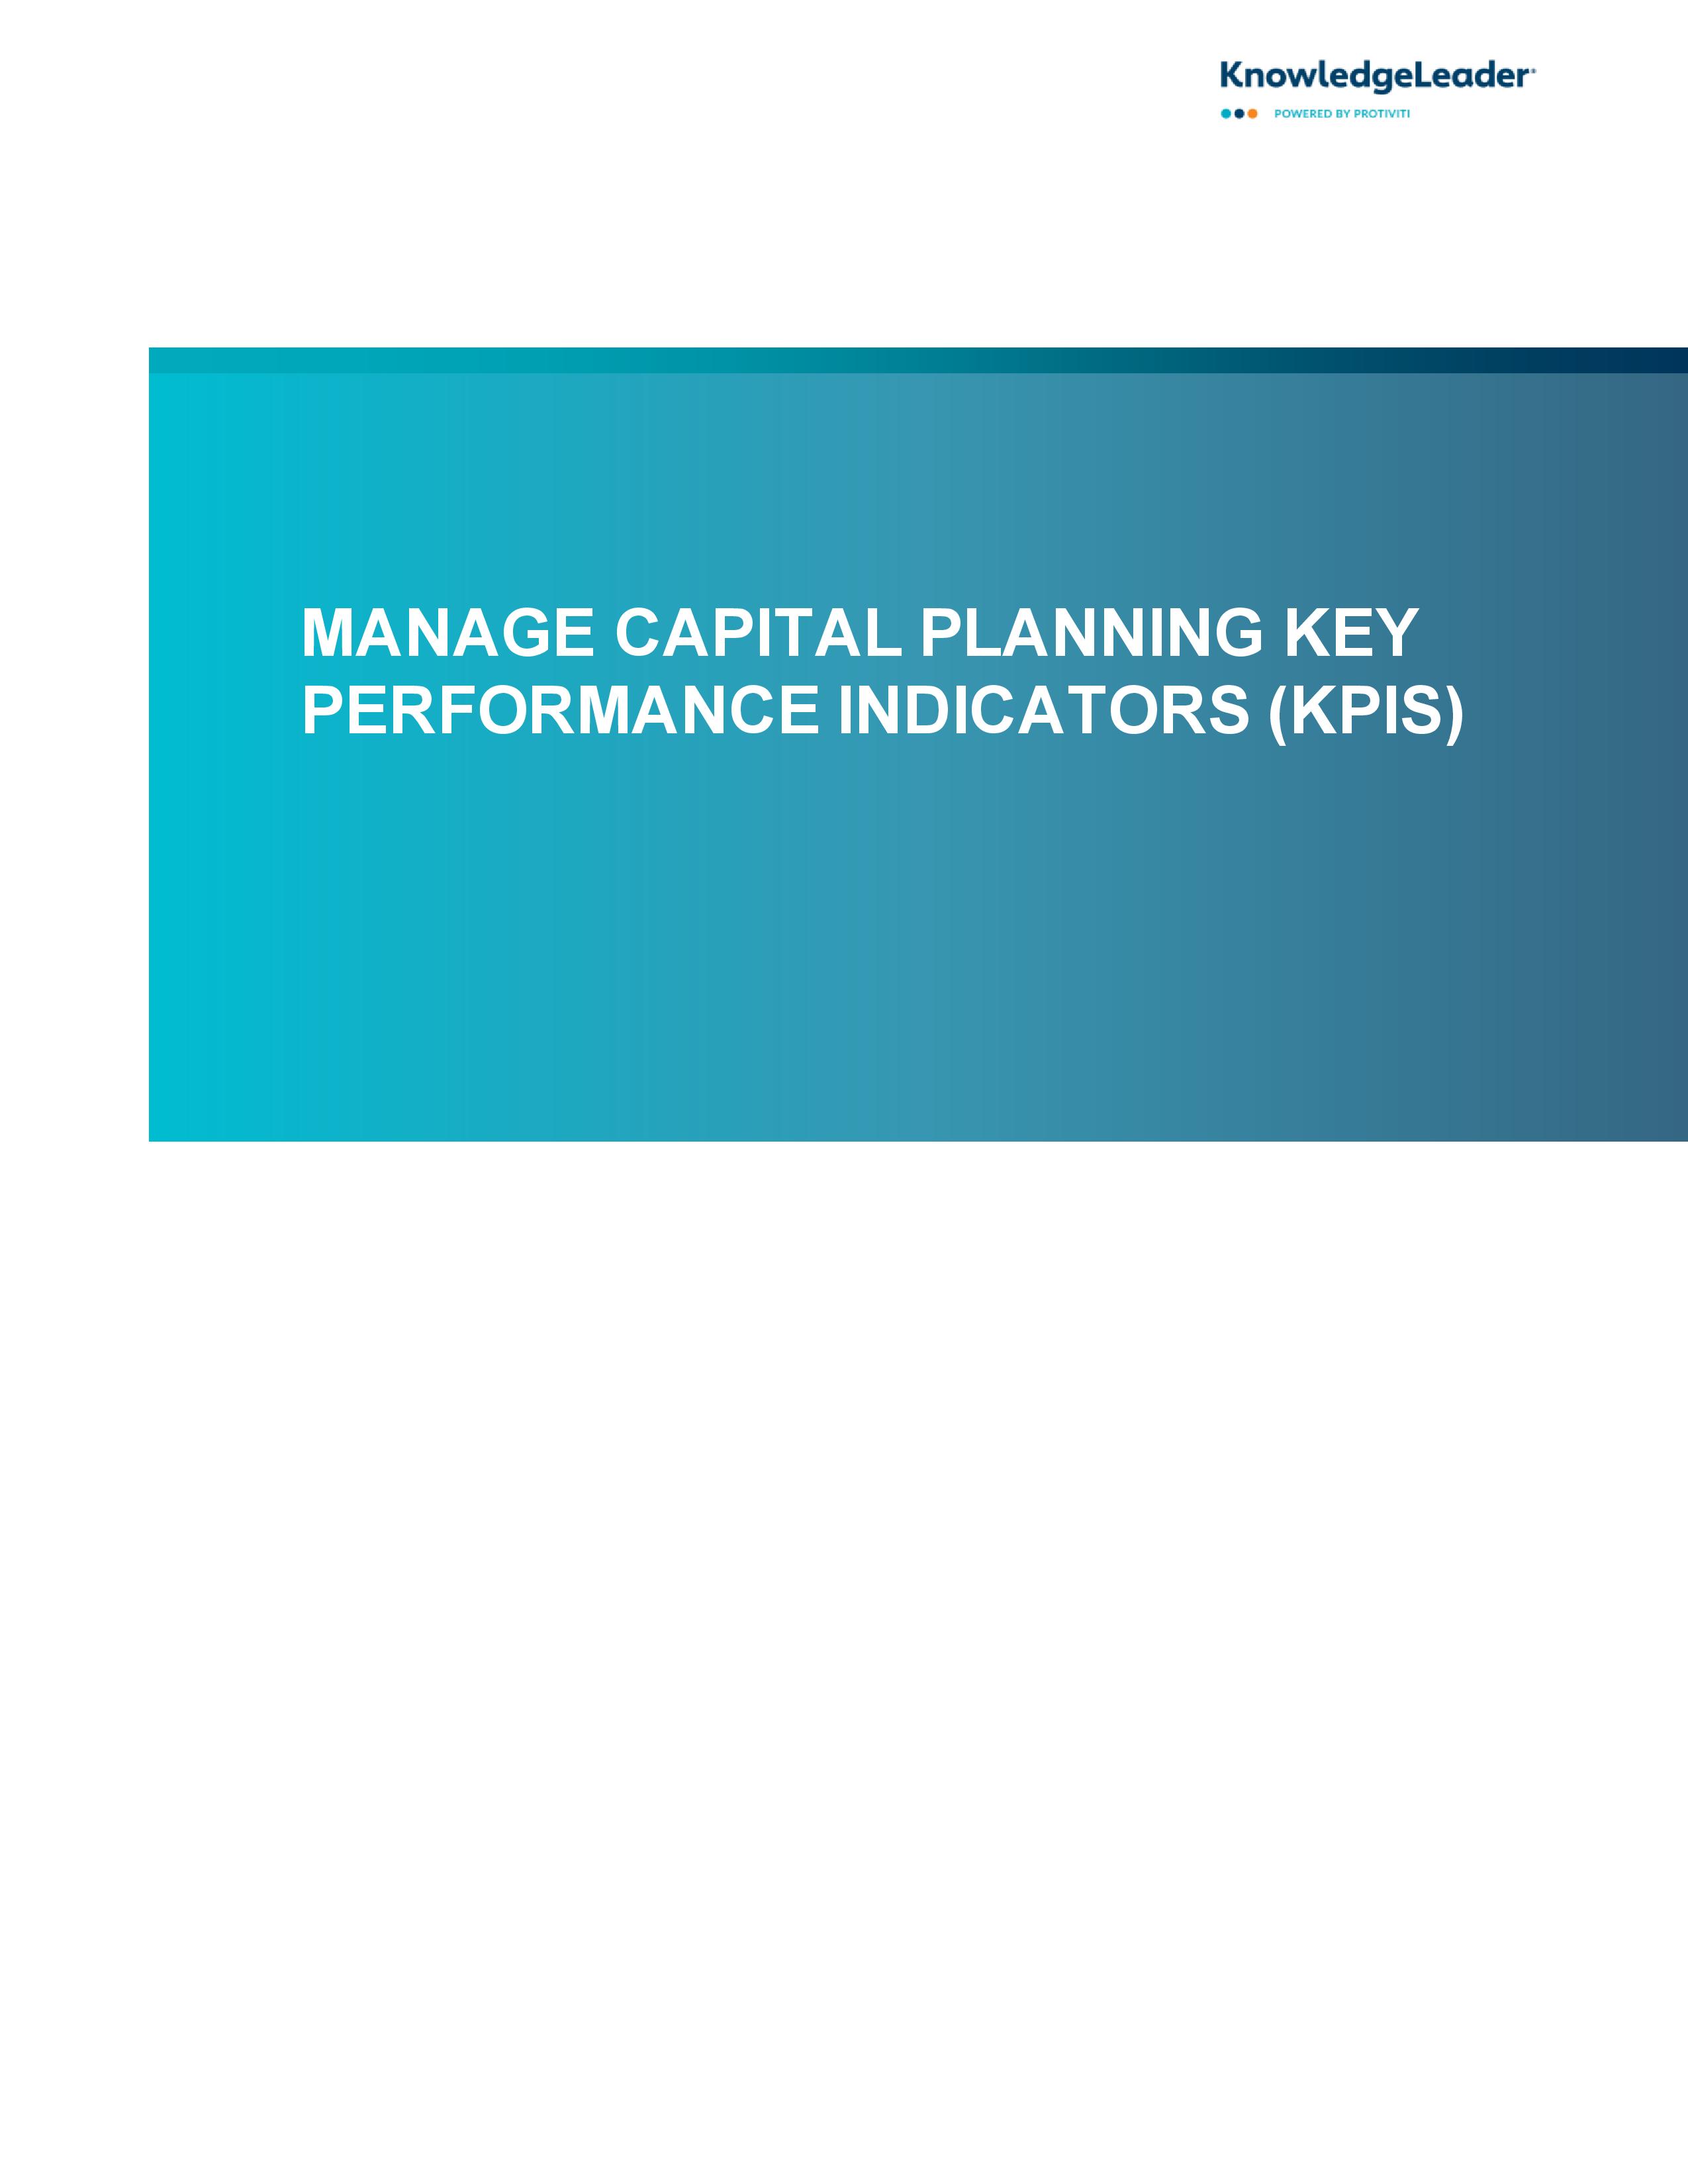 Screenshot of the first page of Manage Capital Planning Key Performance Indicators (KPIs)